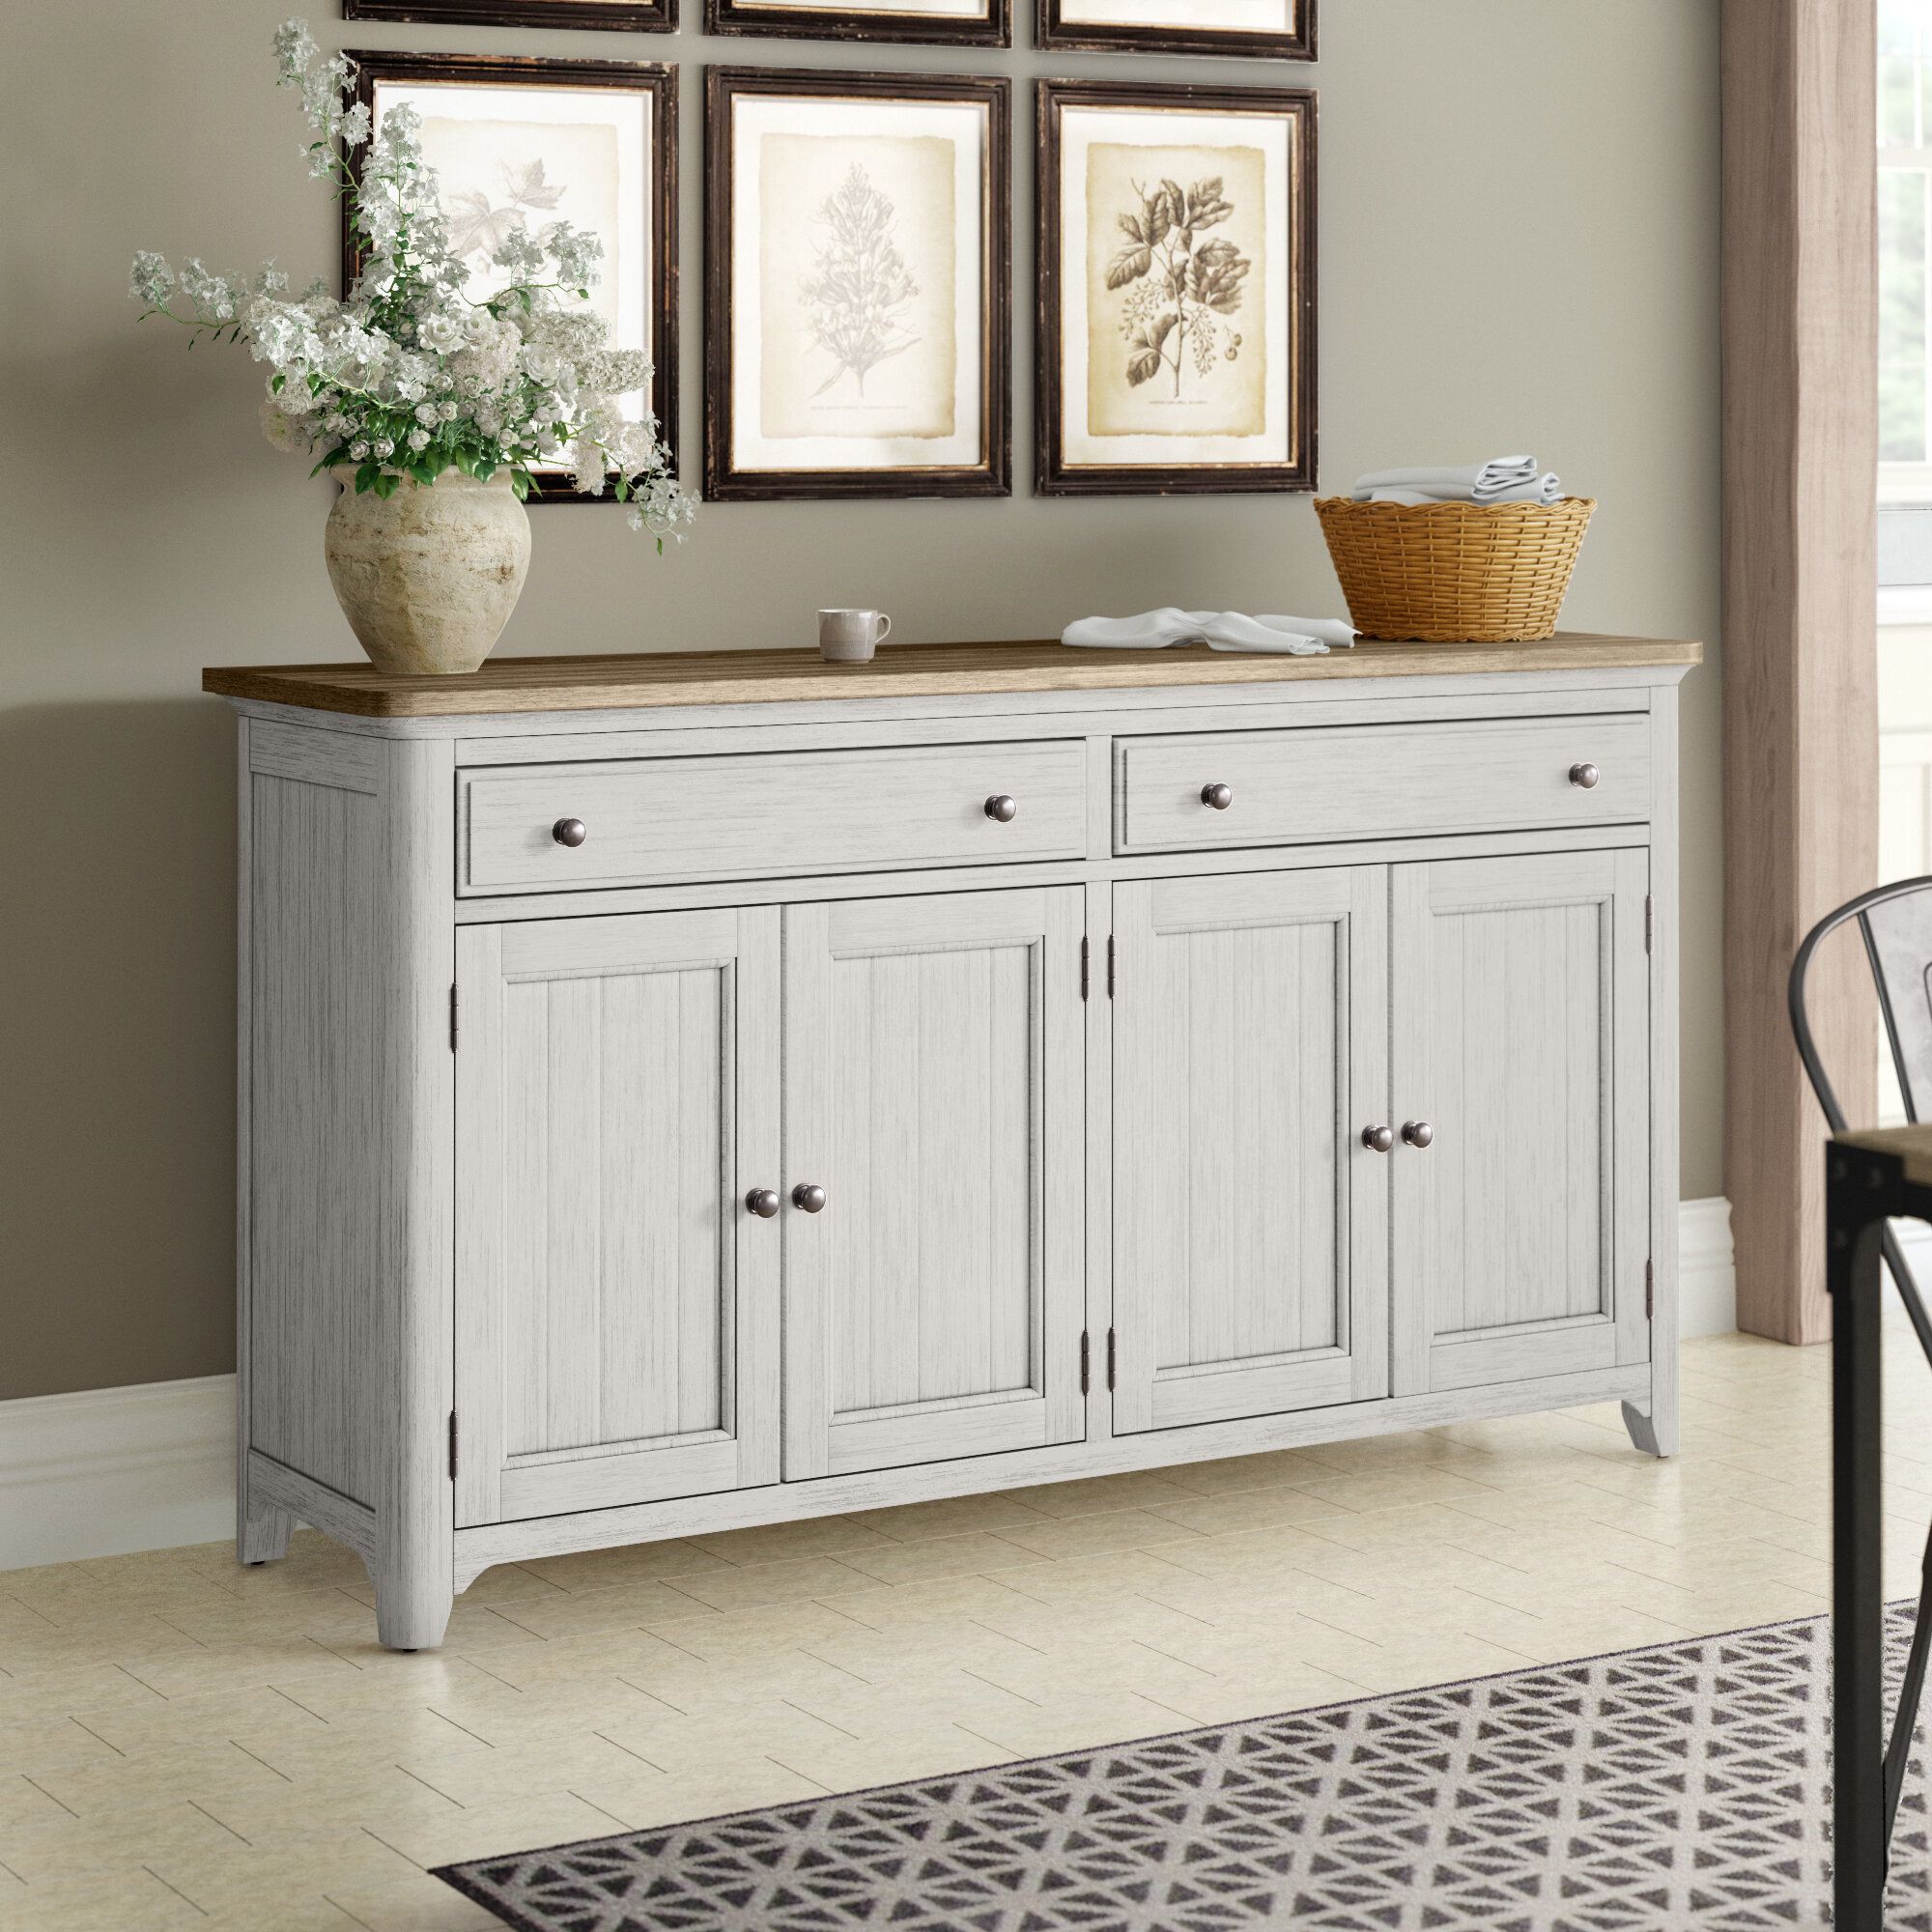 Ophelia & Co. Konen Sideboard & Reviews | Wayfair Within Most Up To Date Gertrude Sideboards (Photo 11 of 20)